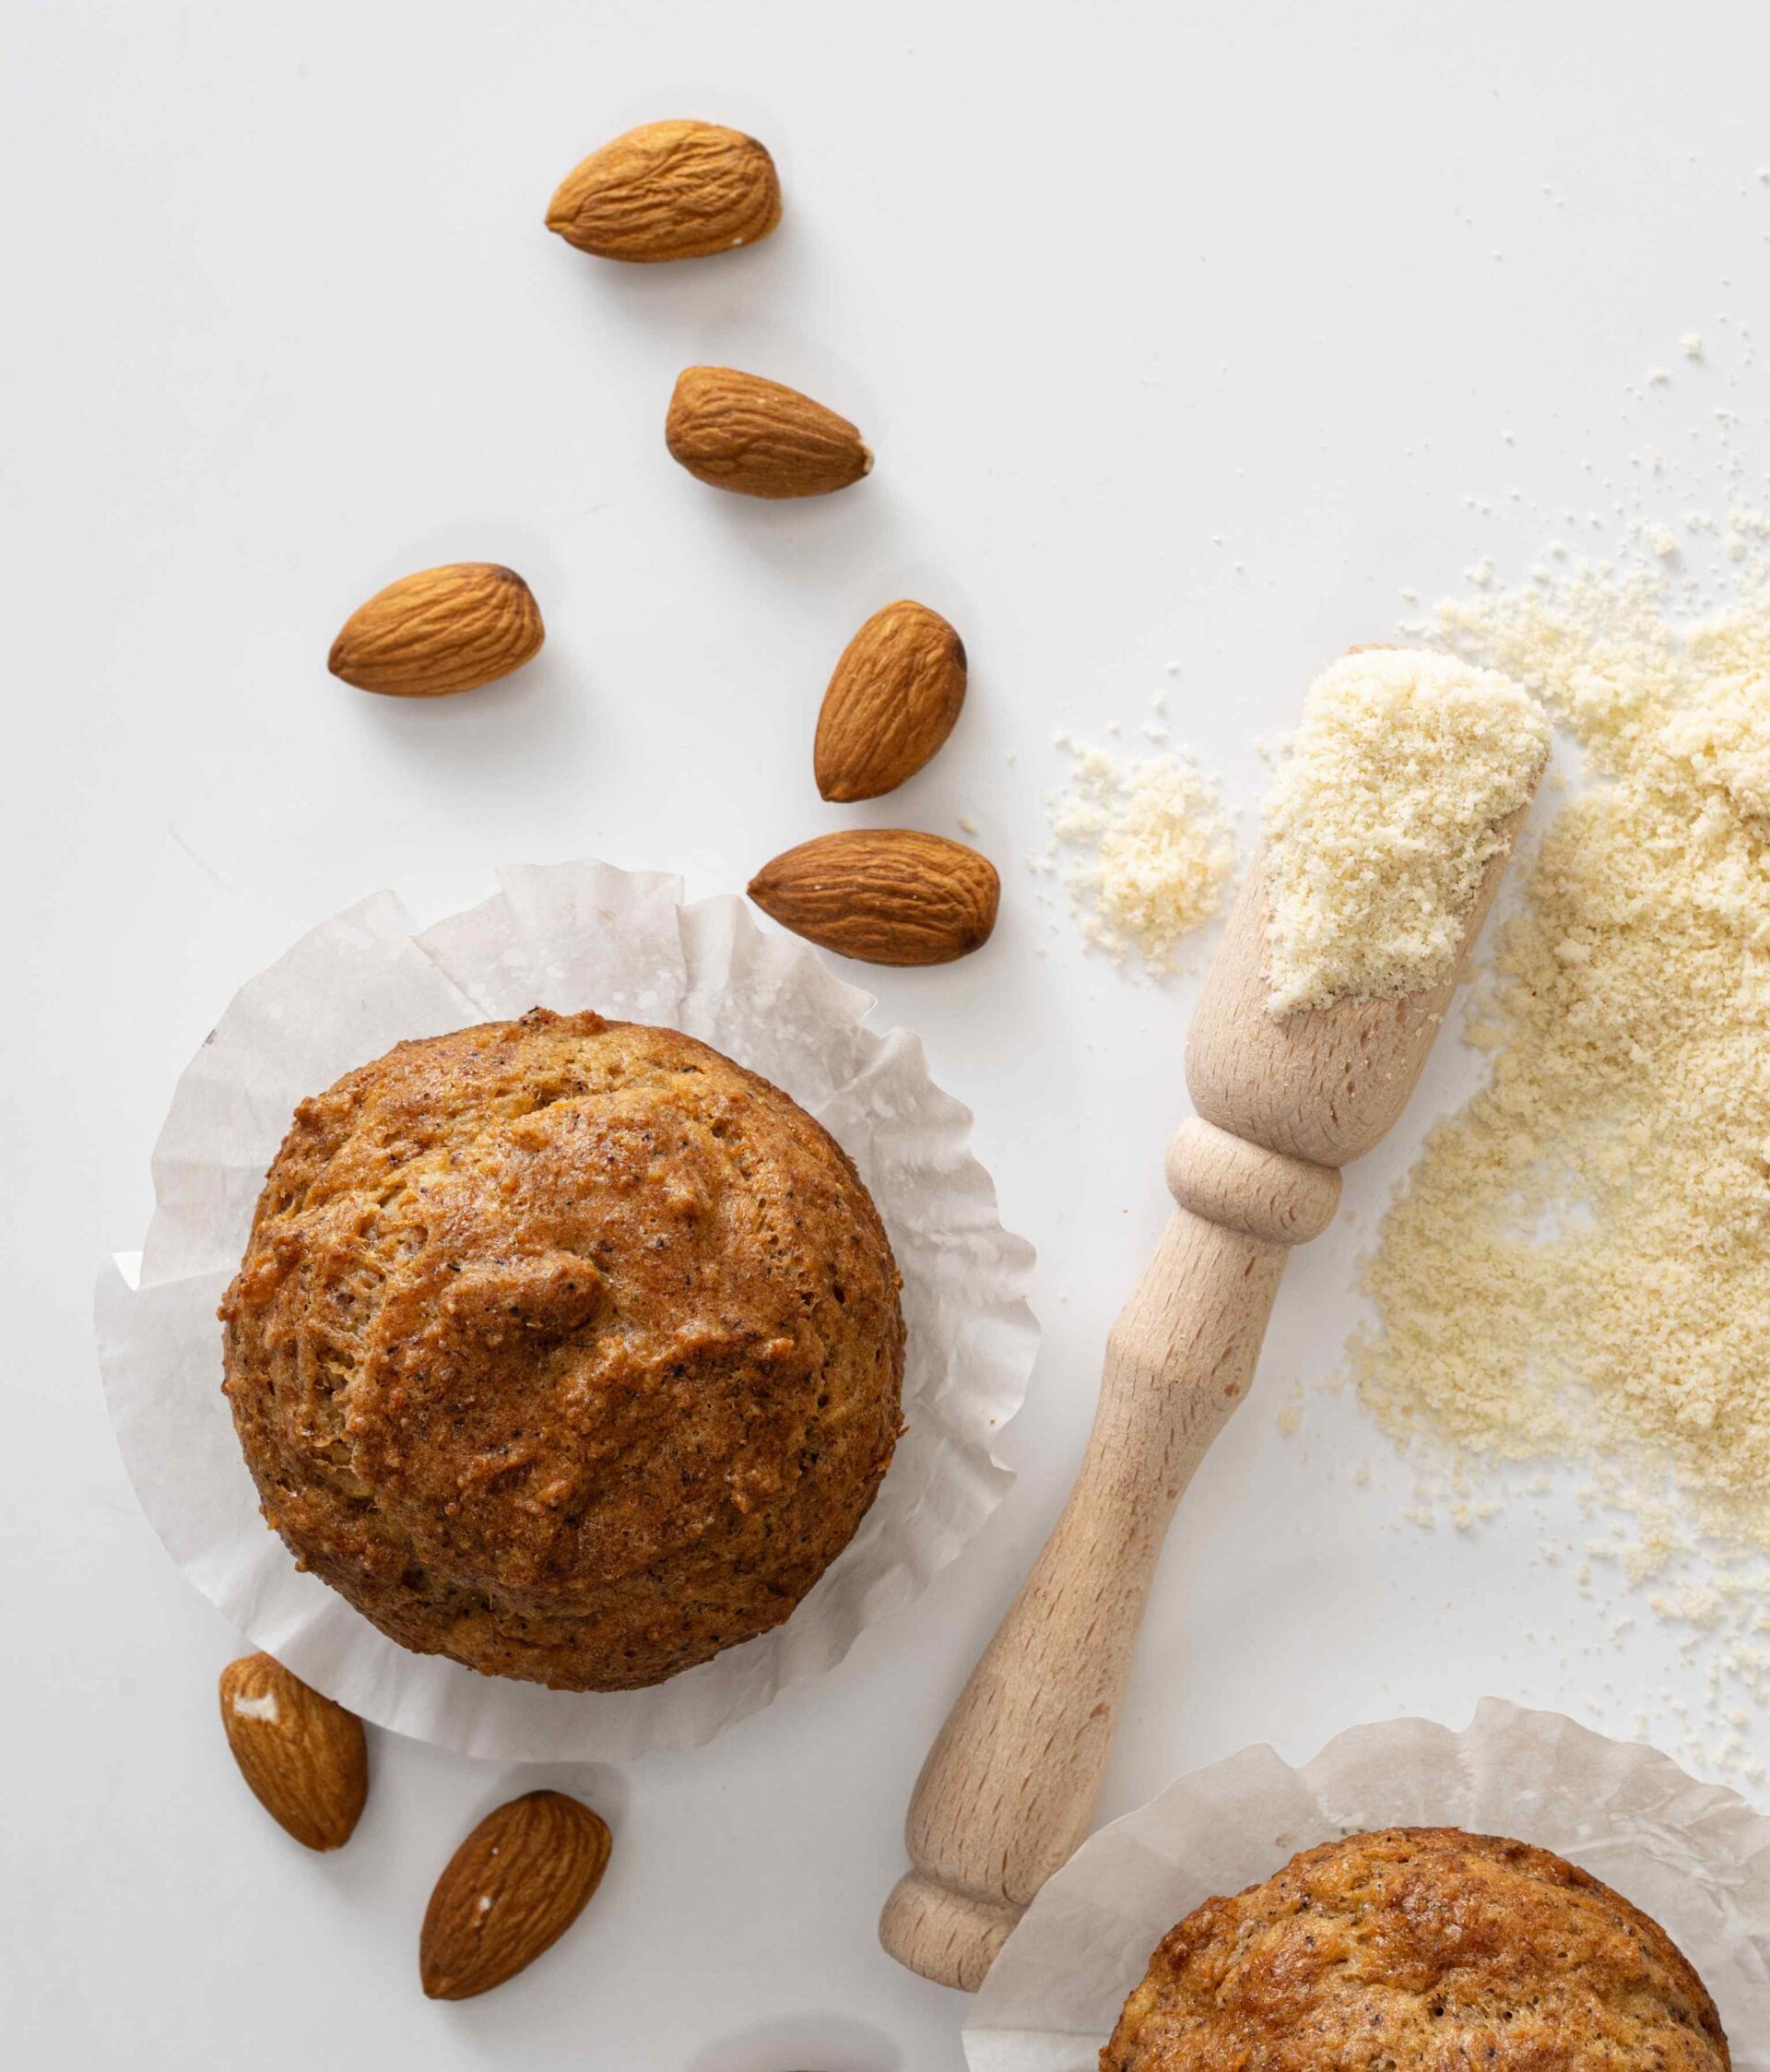 Muffin with almonds and almond flour -Pancake and muffin organic almond flour baking mix